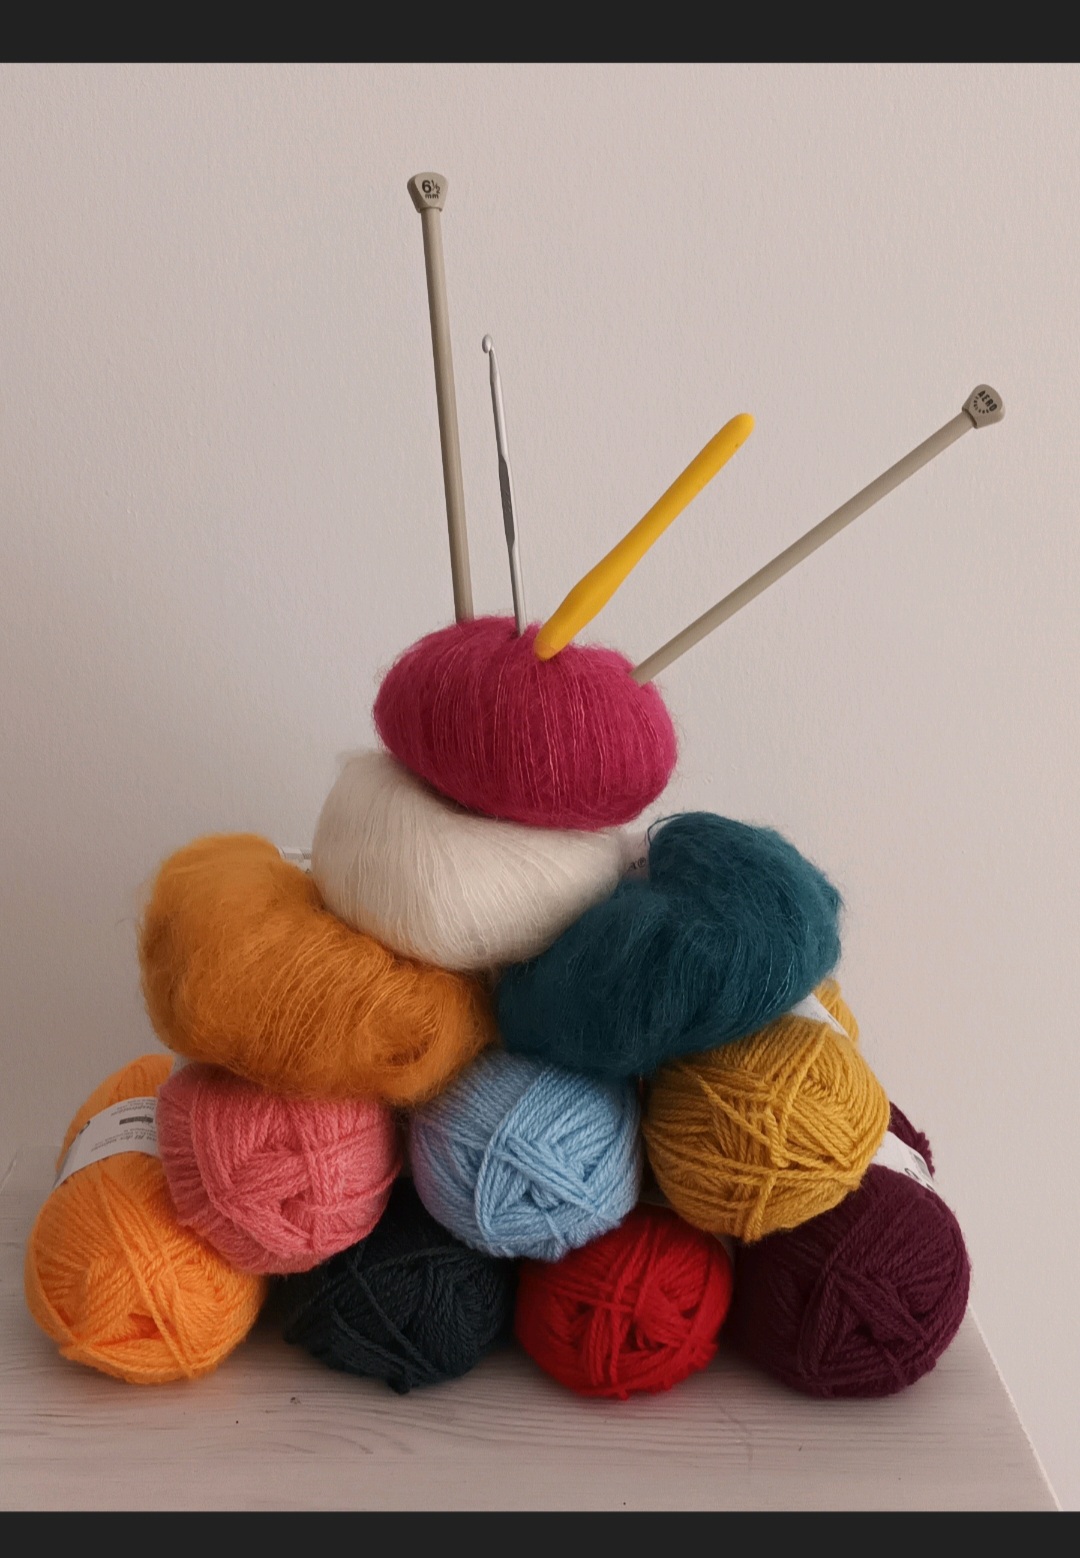 Knitting and crochet lessons